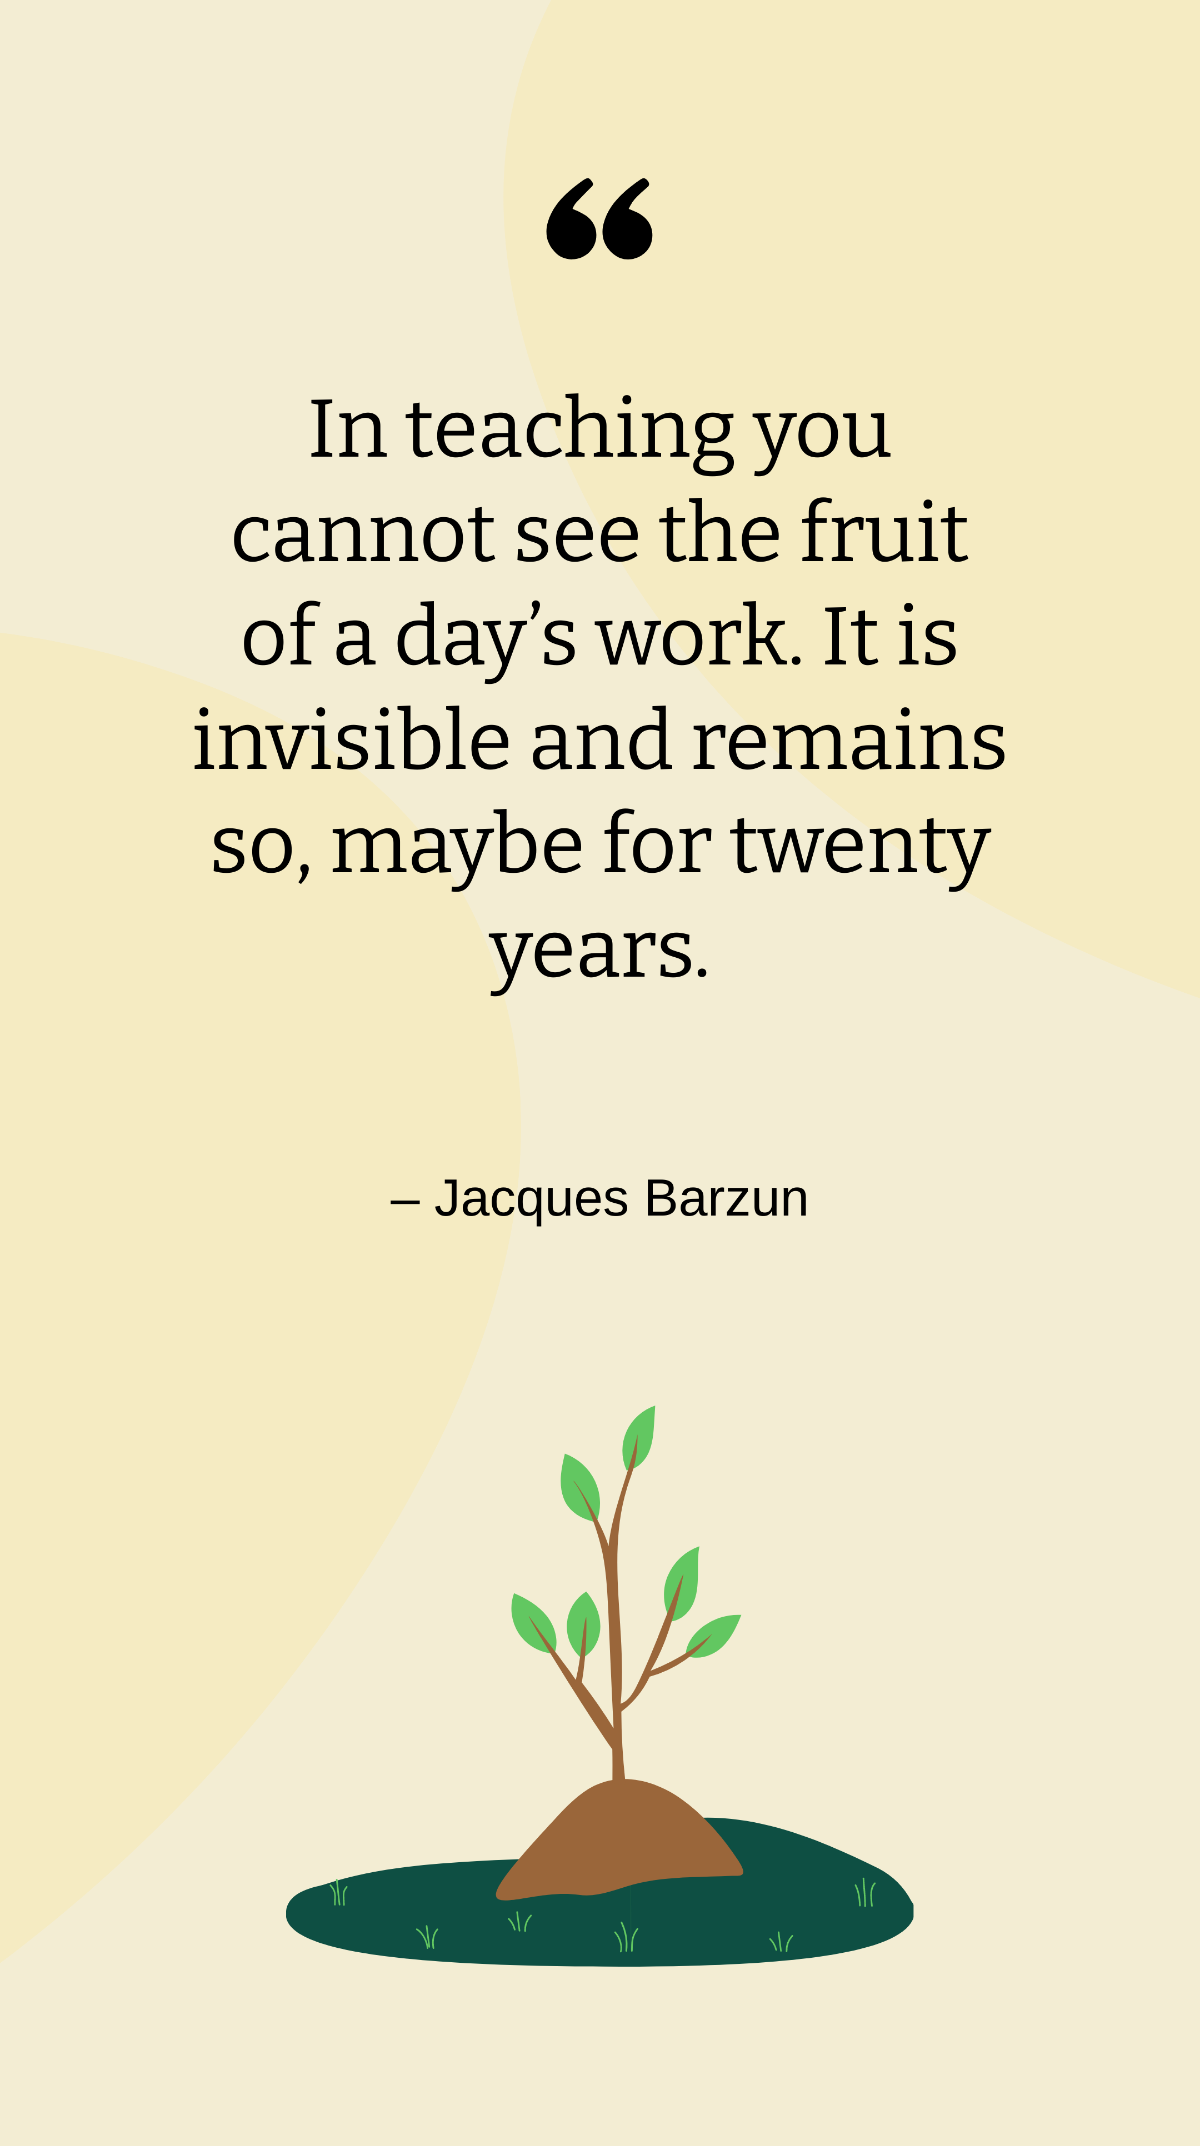 Free Jacques Barzun - In teaching you cannot see the fruit of a day’s work. It is invisible and remains so, maybe for twenty years. Template